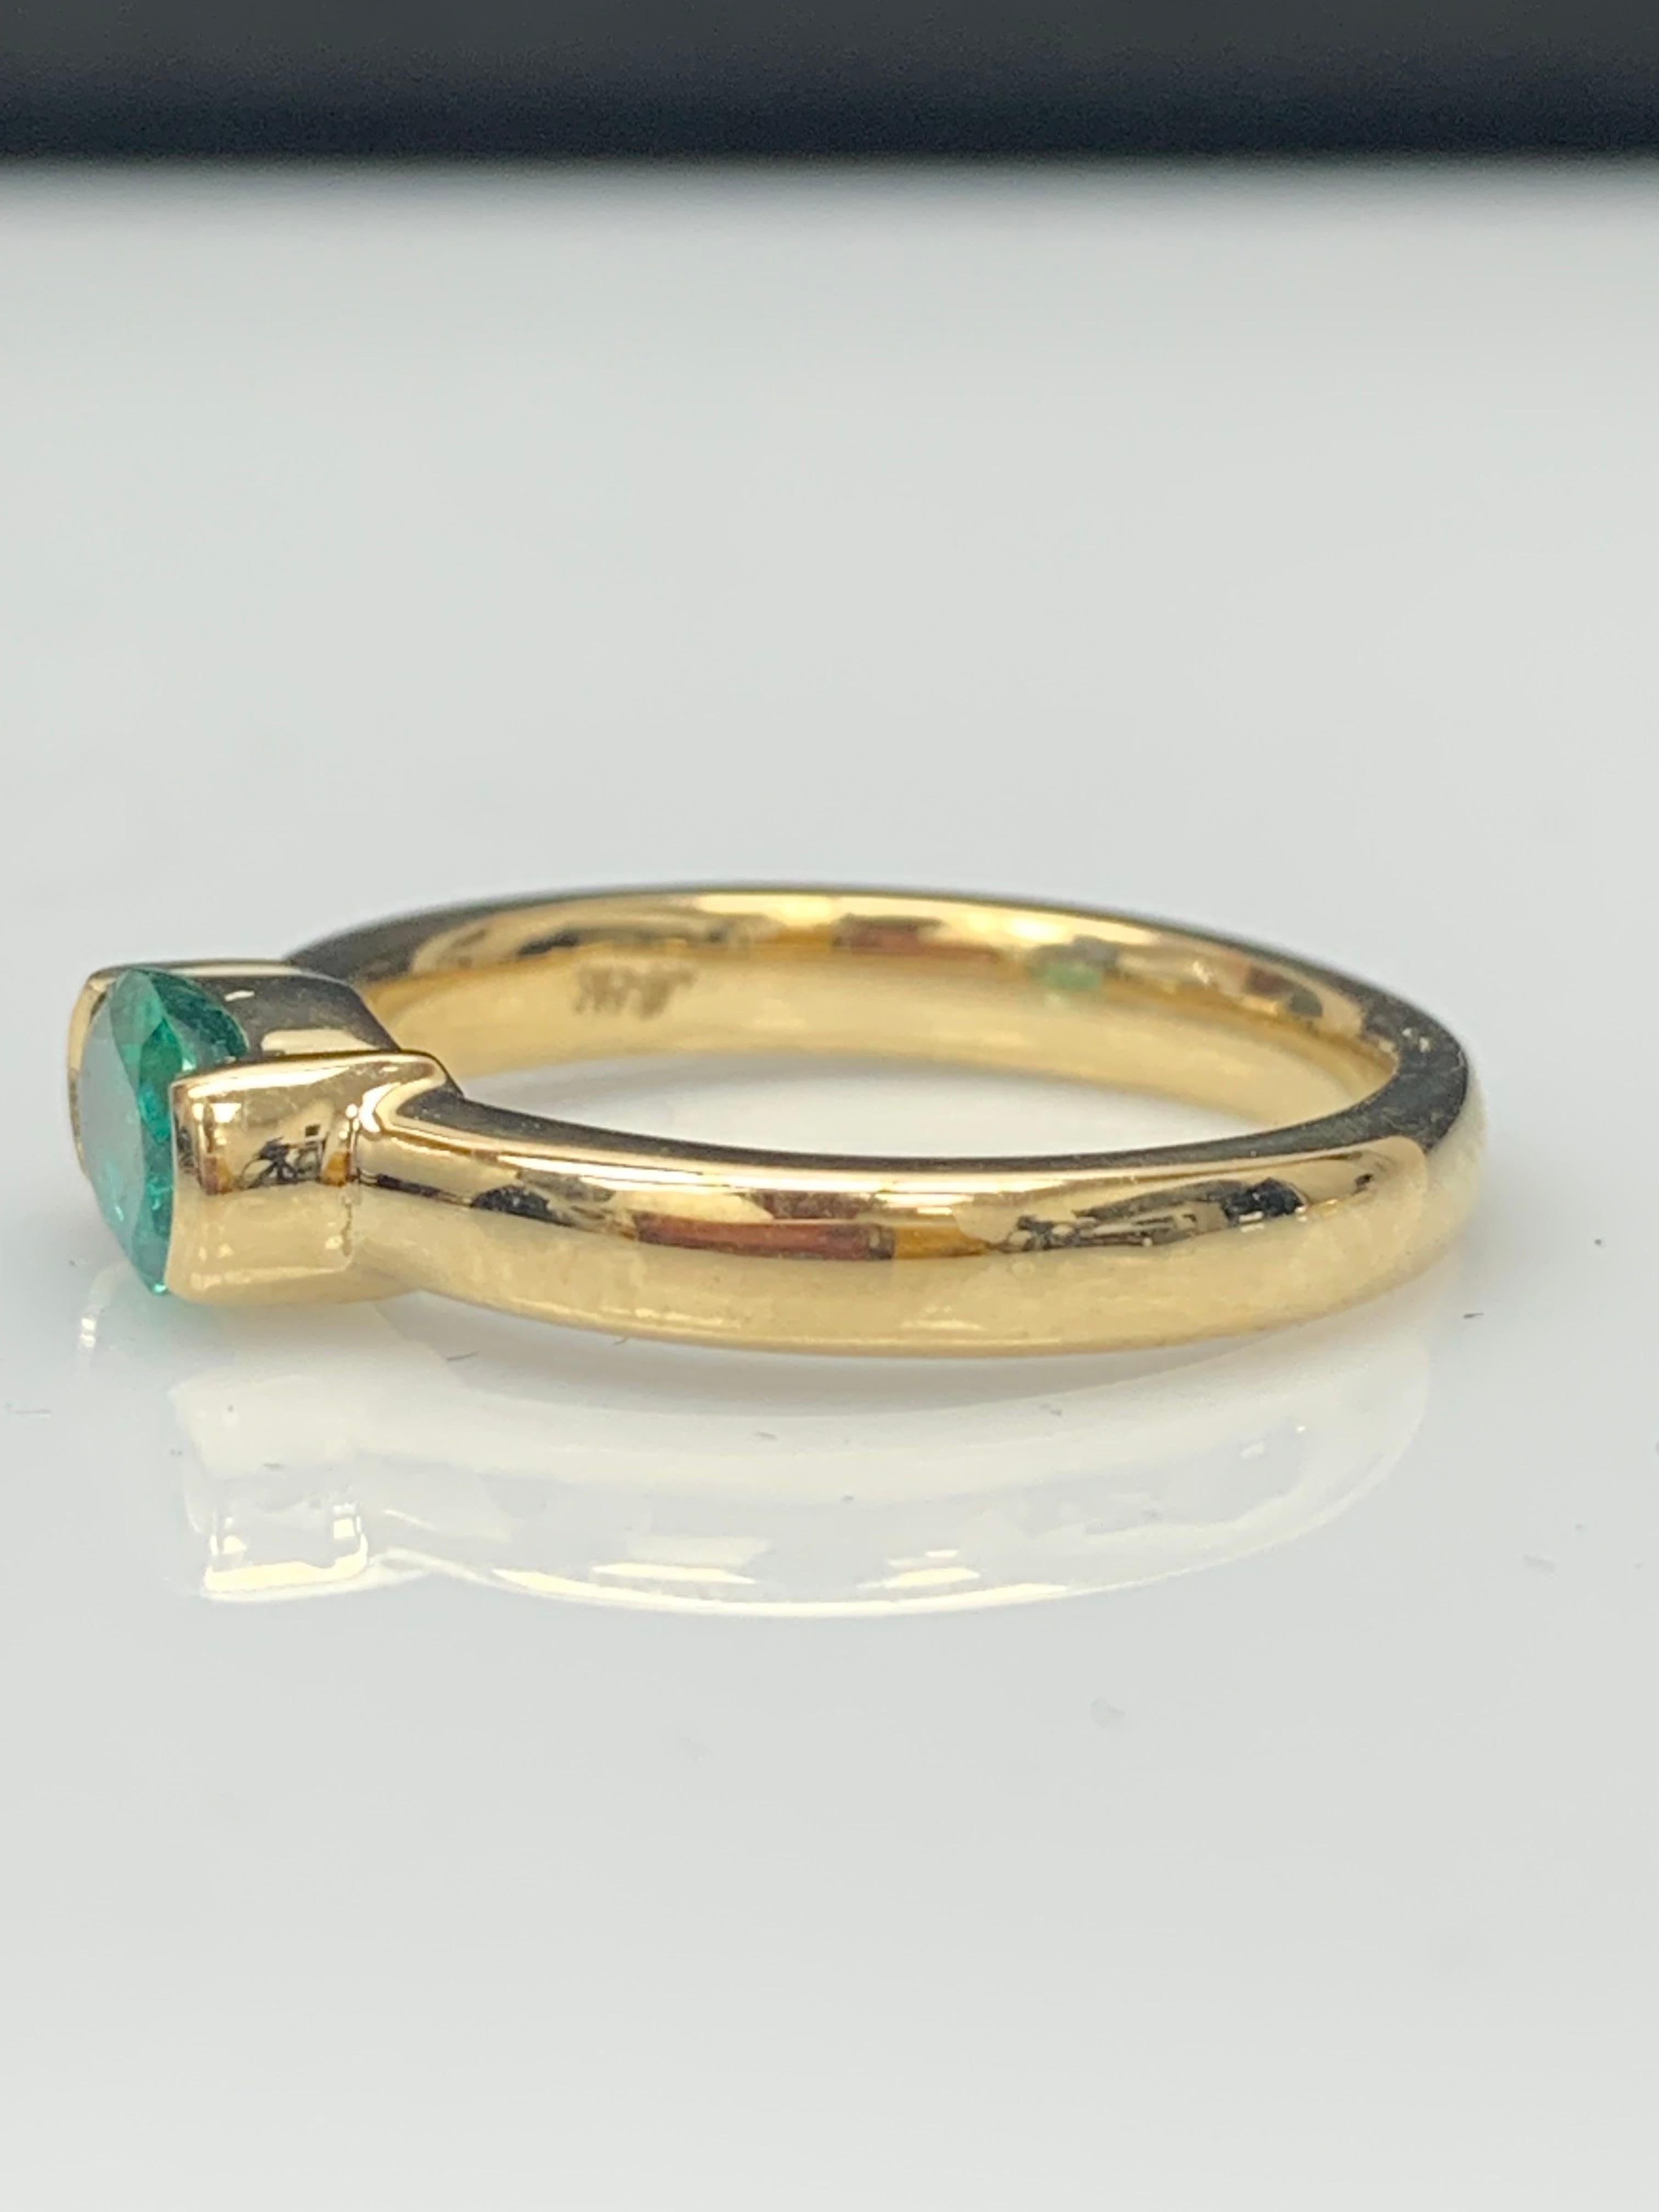 0.77 Carat Oval Cut Emerald Band Ring in 14K Yellow Gold For Sale 5